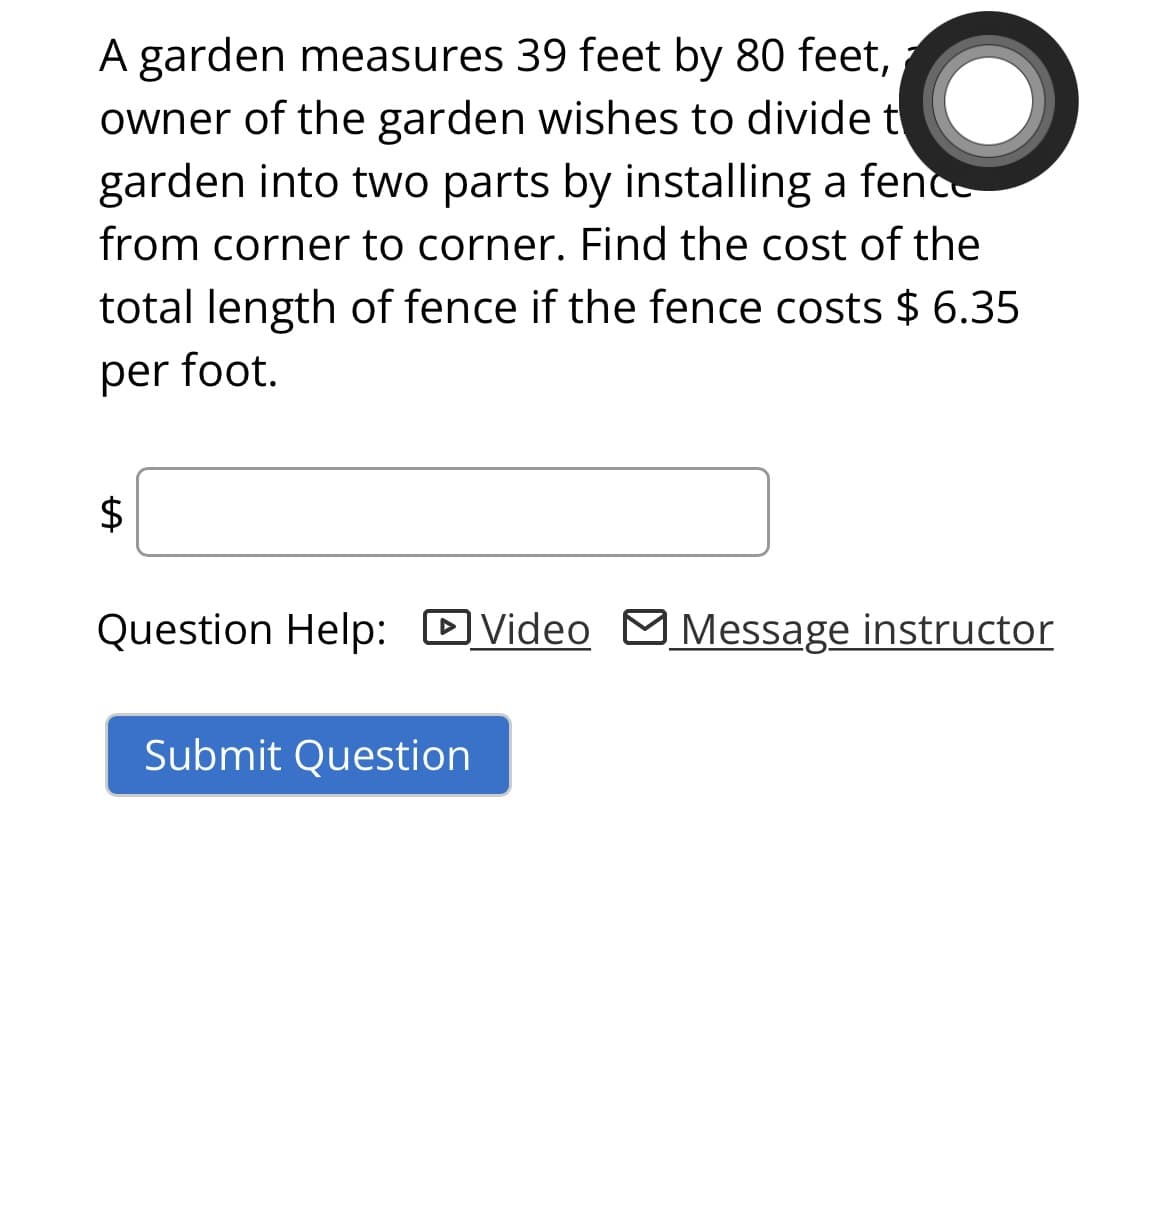 A garden measures 39 feet by 80 feet,
owner of the garden wishes to divide t
garden into two parts by installing a fence
from corner to corner. Find the cost of the
total length of fence if the fence costs $ 6.35
per foot.
$
Question Help: Video Message instructor
Submit Question